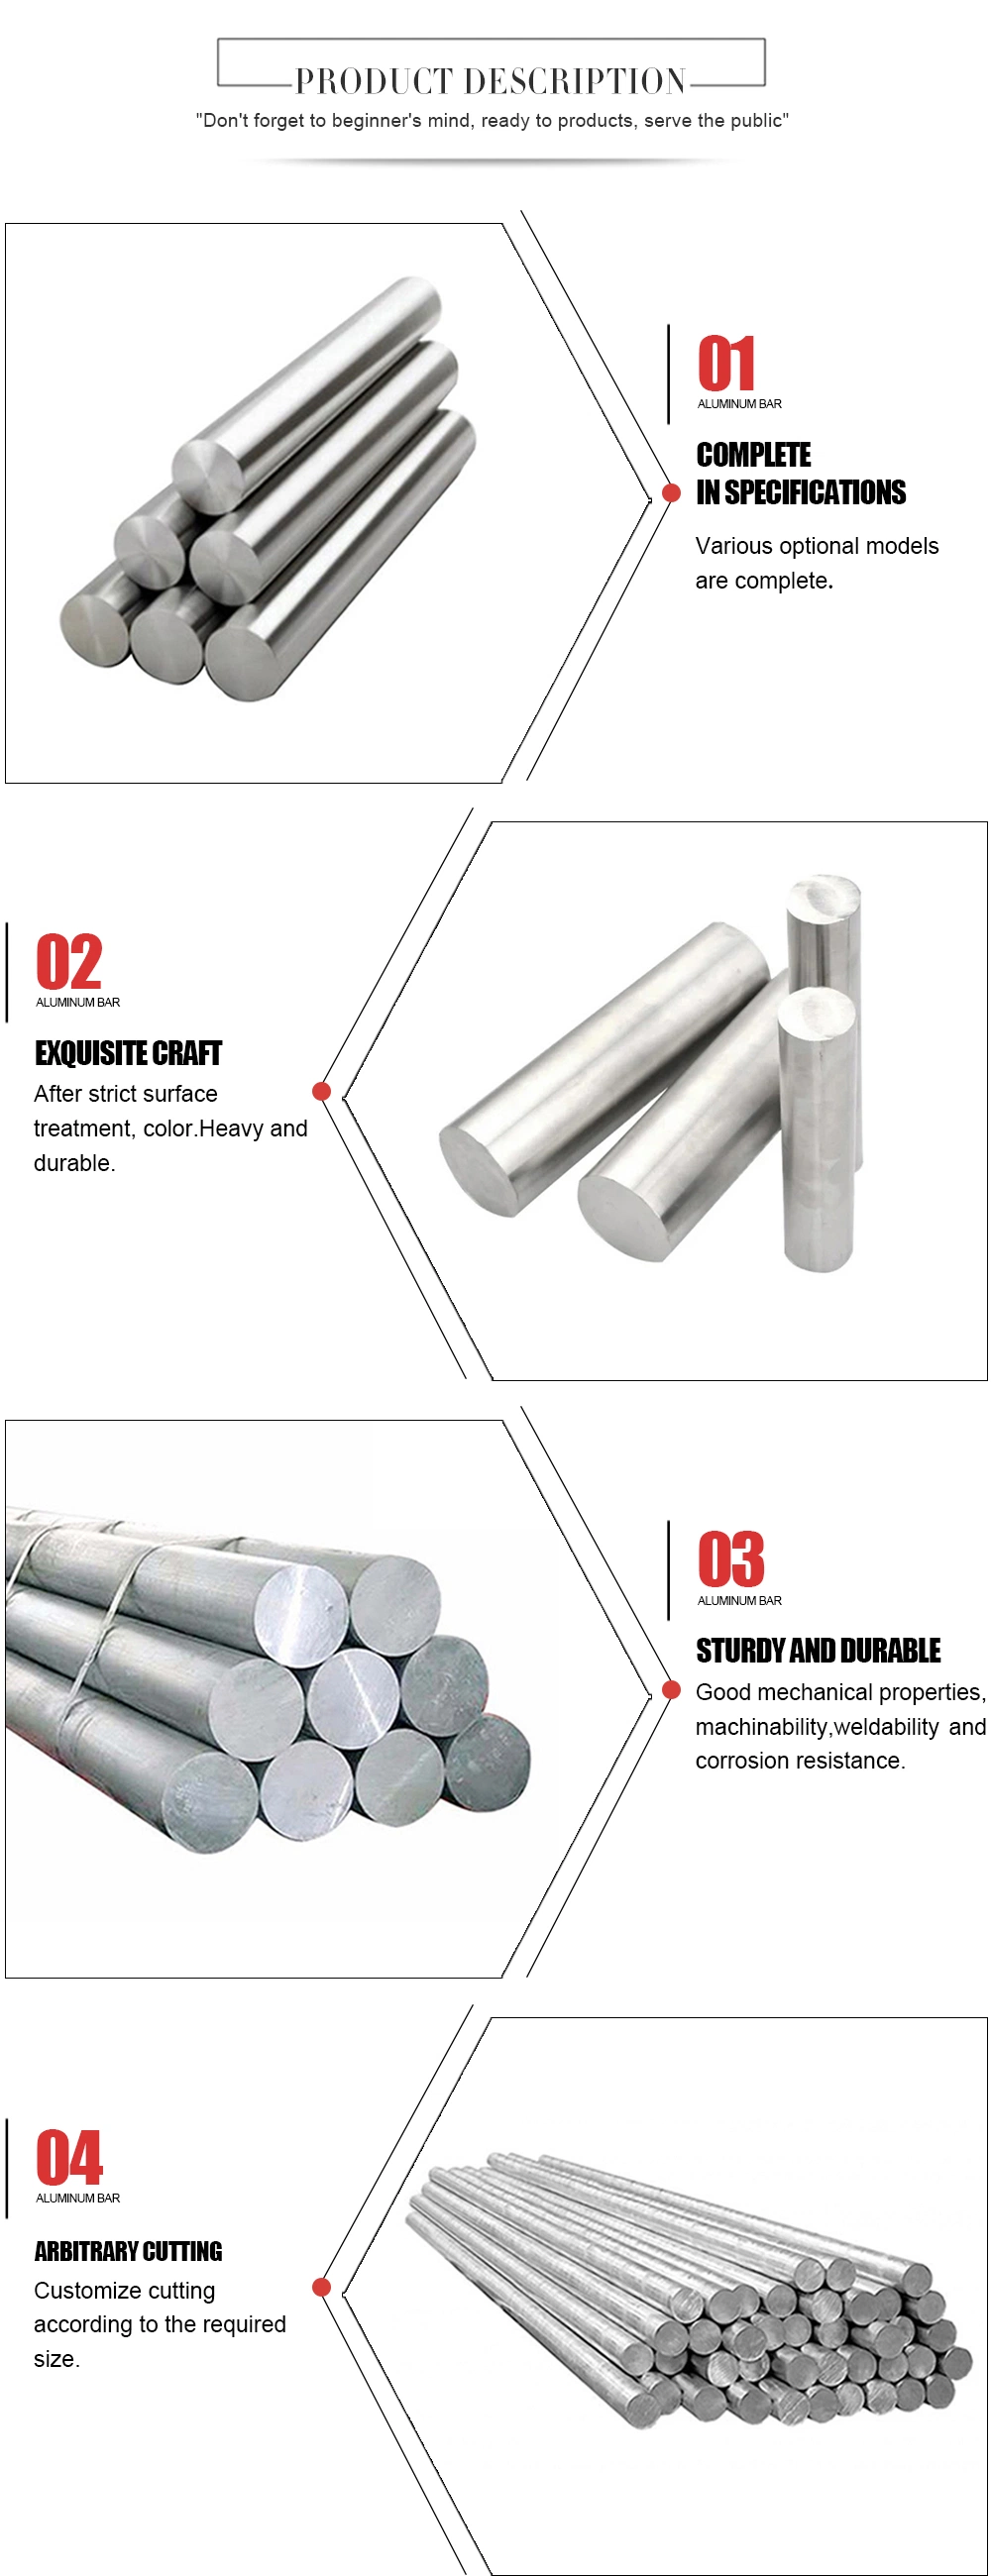 High Hardness 3 Inch 2A16 2A02 2024 8176 T3 T4 T351 Aluminum Alloy Round Bar Price